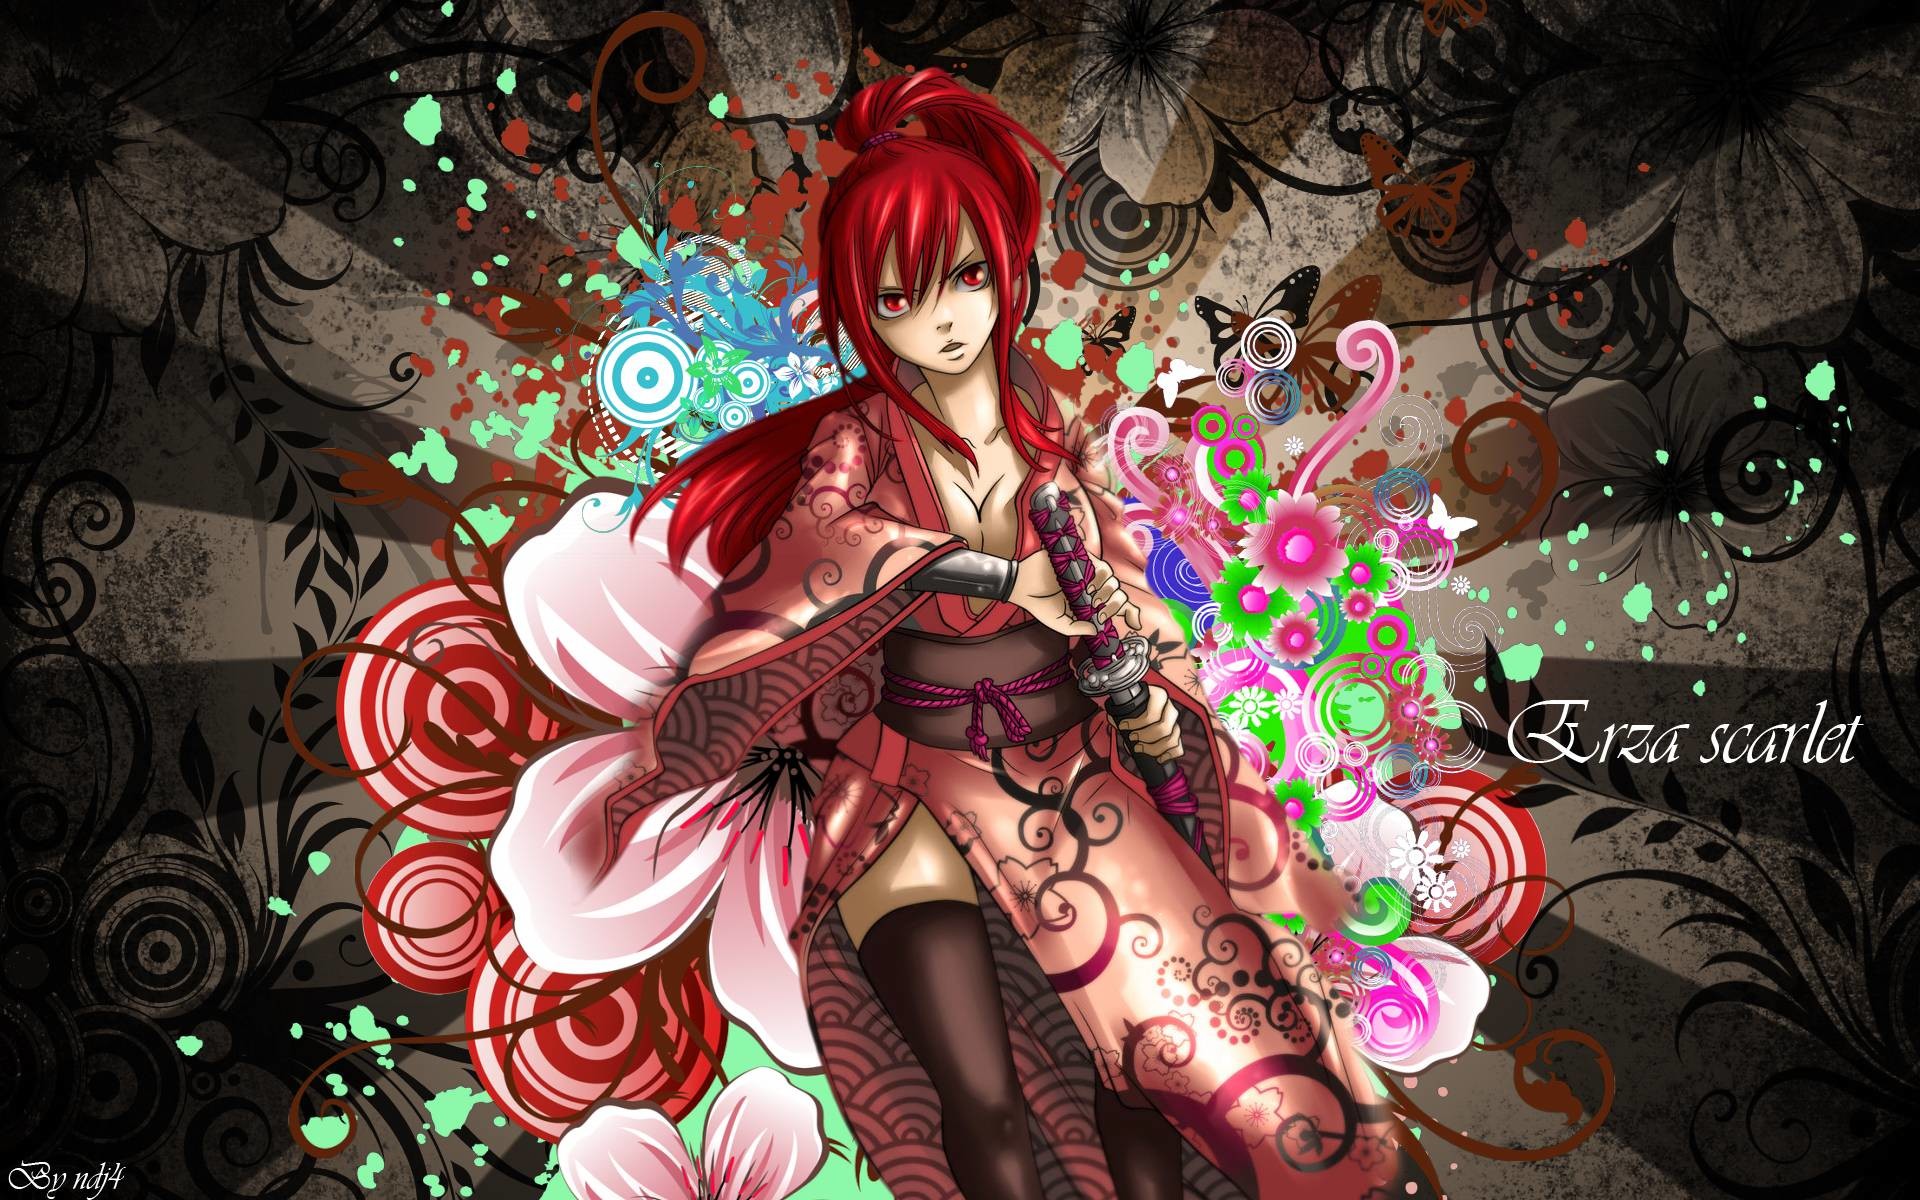 330 Erza Scarlet HD Wallpapers and Backgrounds